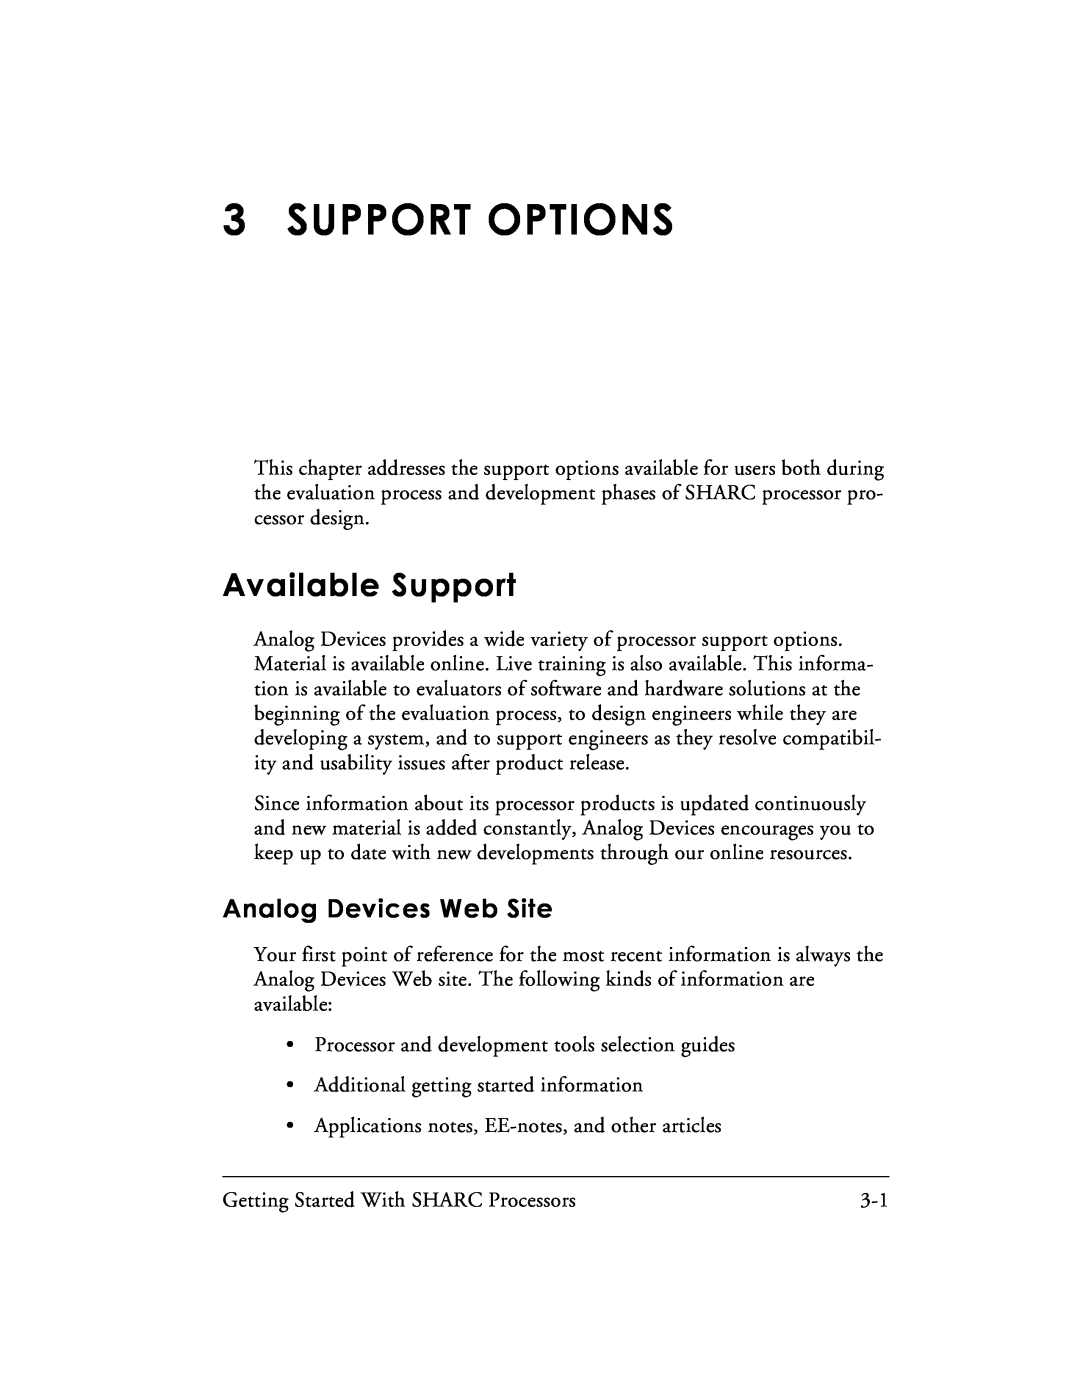 Analog Devices 82-003536-01 manual Support Options, Available Support, Analog Devices Web Site 